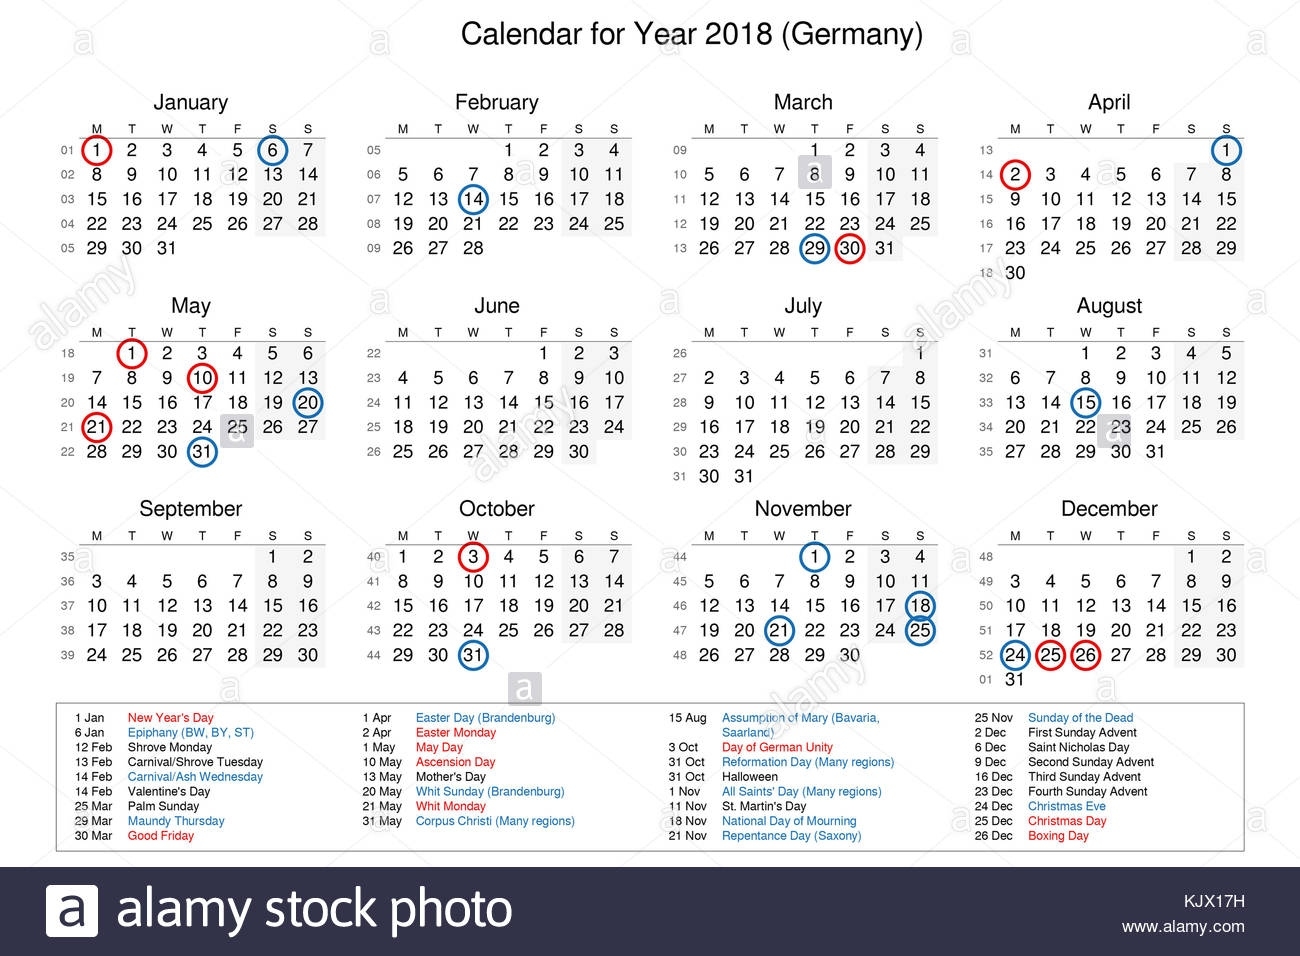 Calendar Of Year 2018 With Public Holidays And Bank Holidays For Calendar Public Holidays Germany